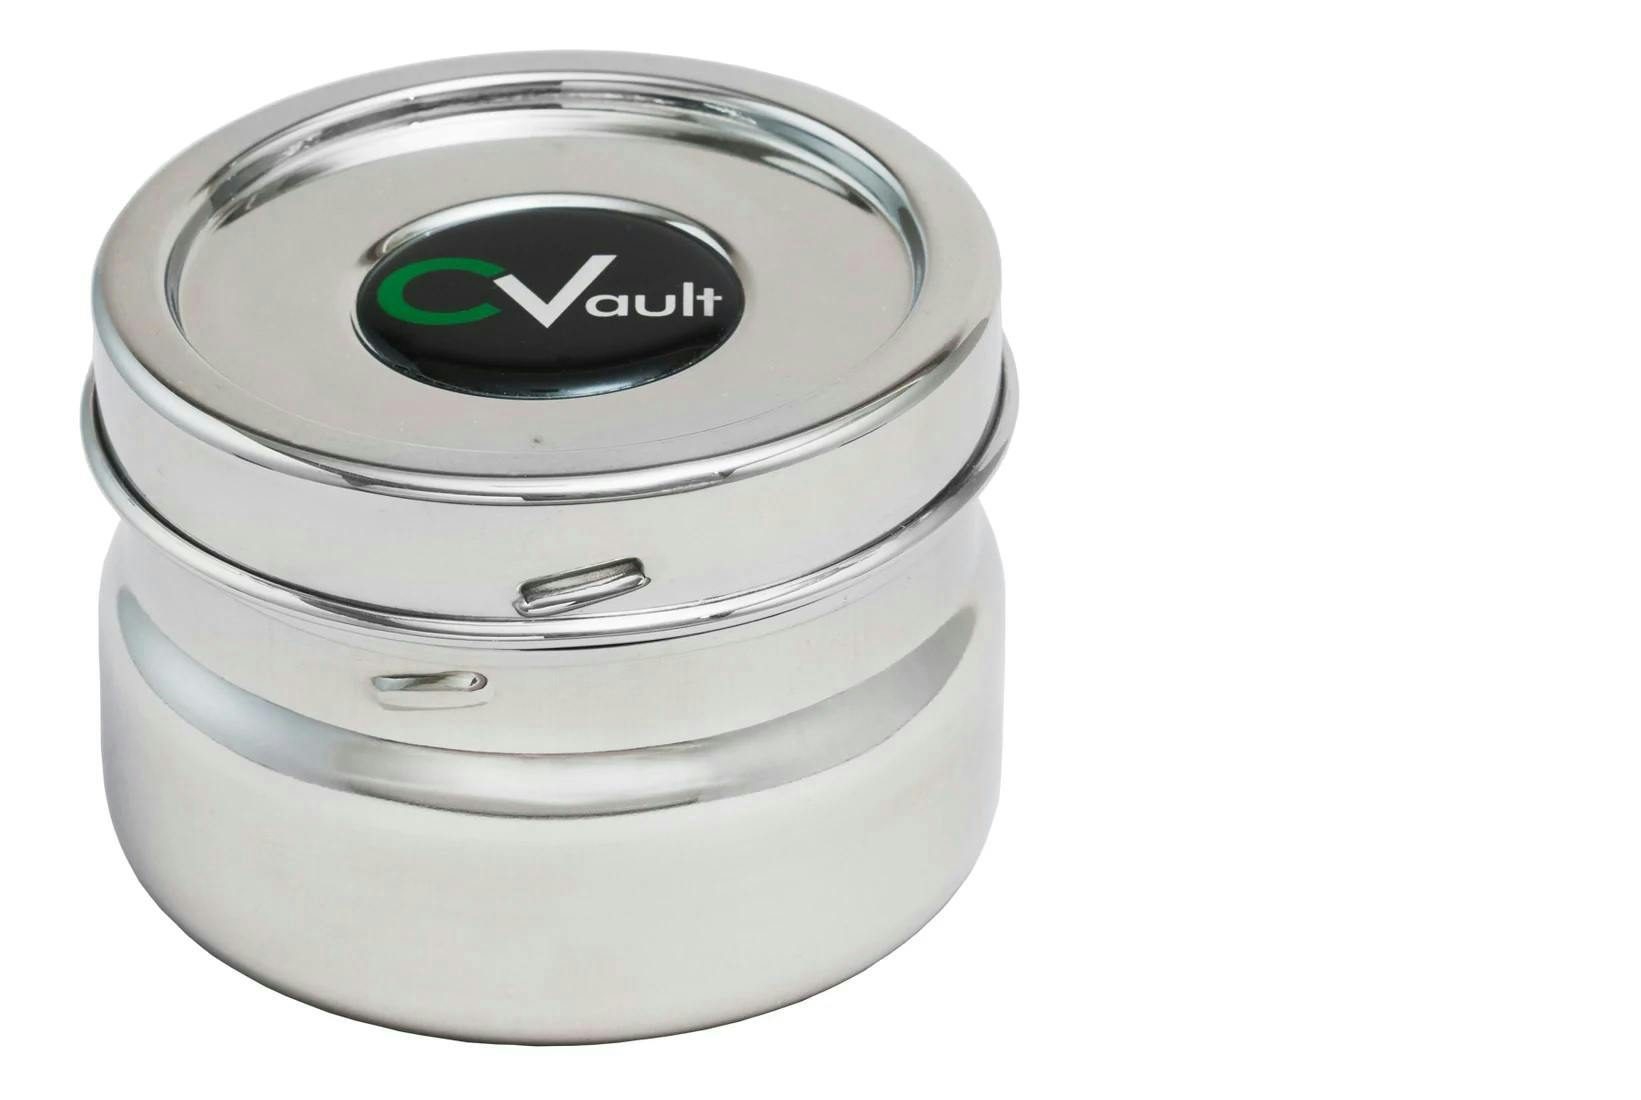 FreshStor - Extra Small CVault Container